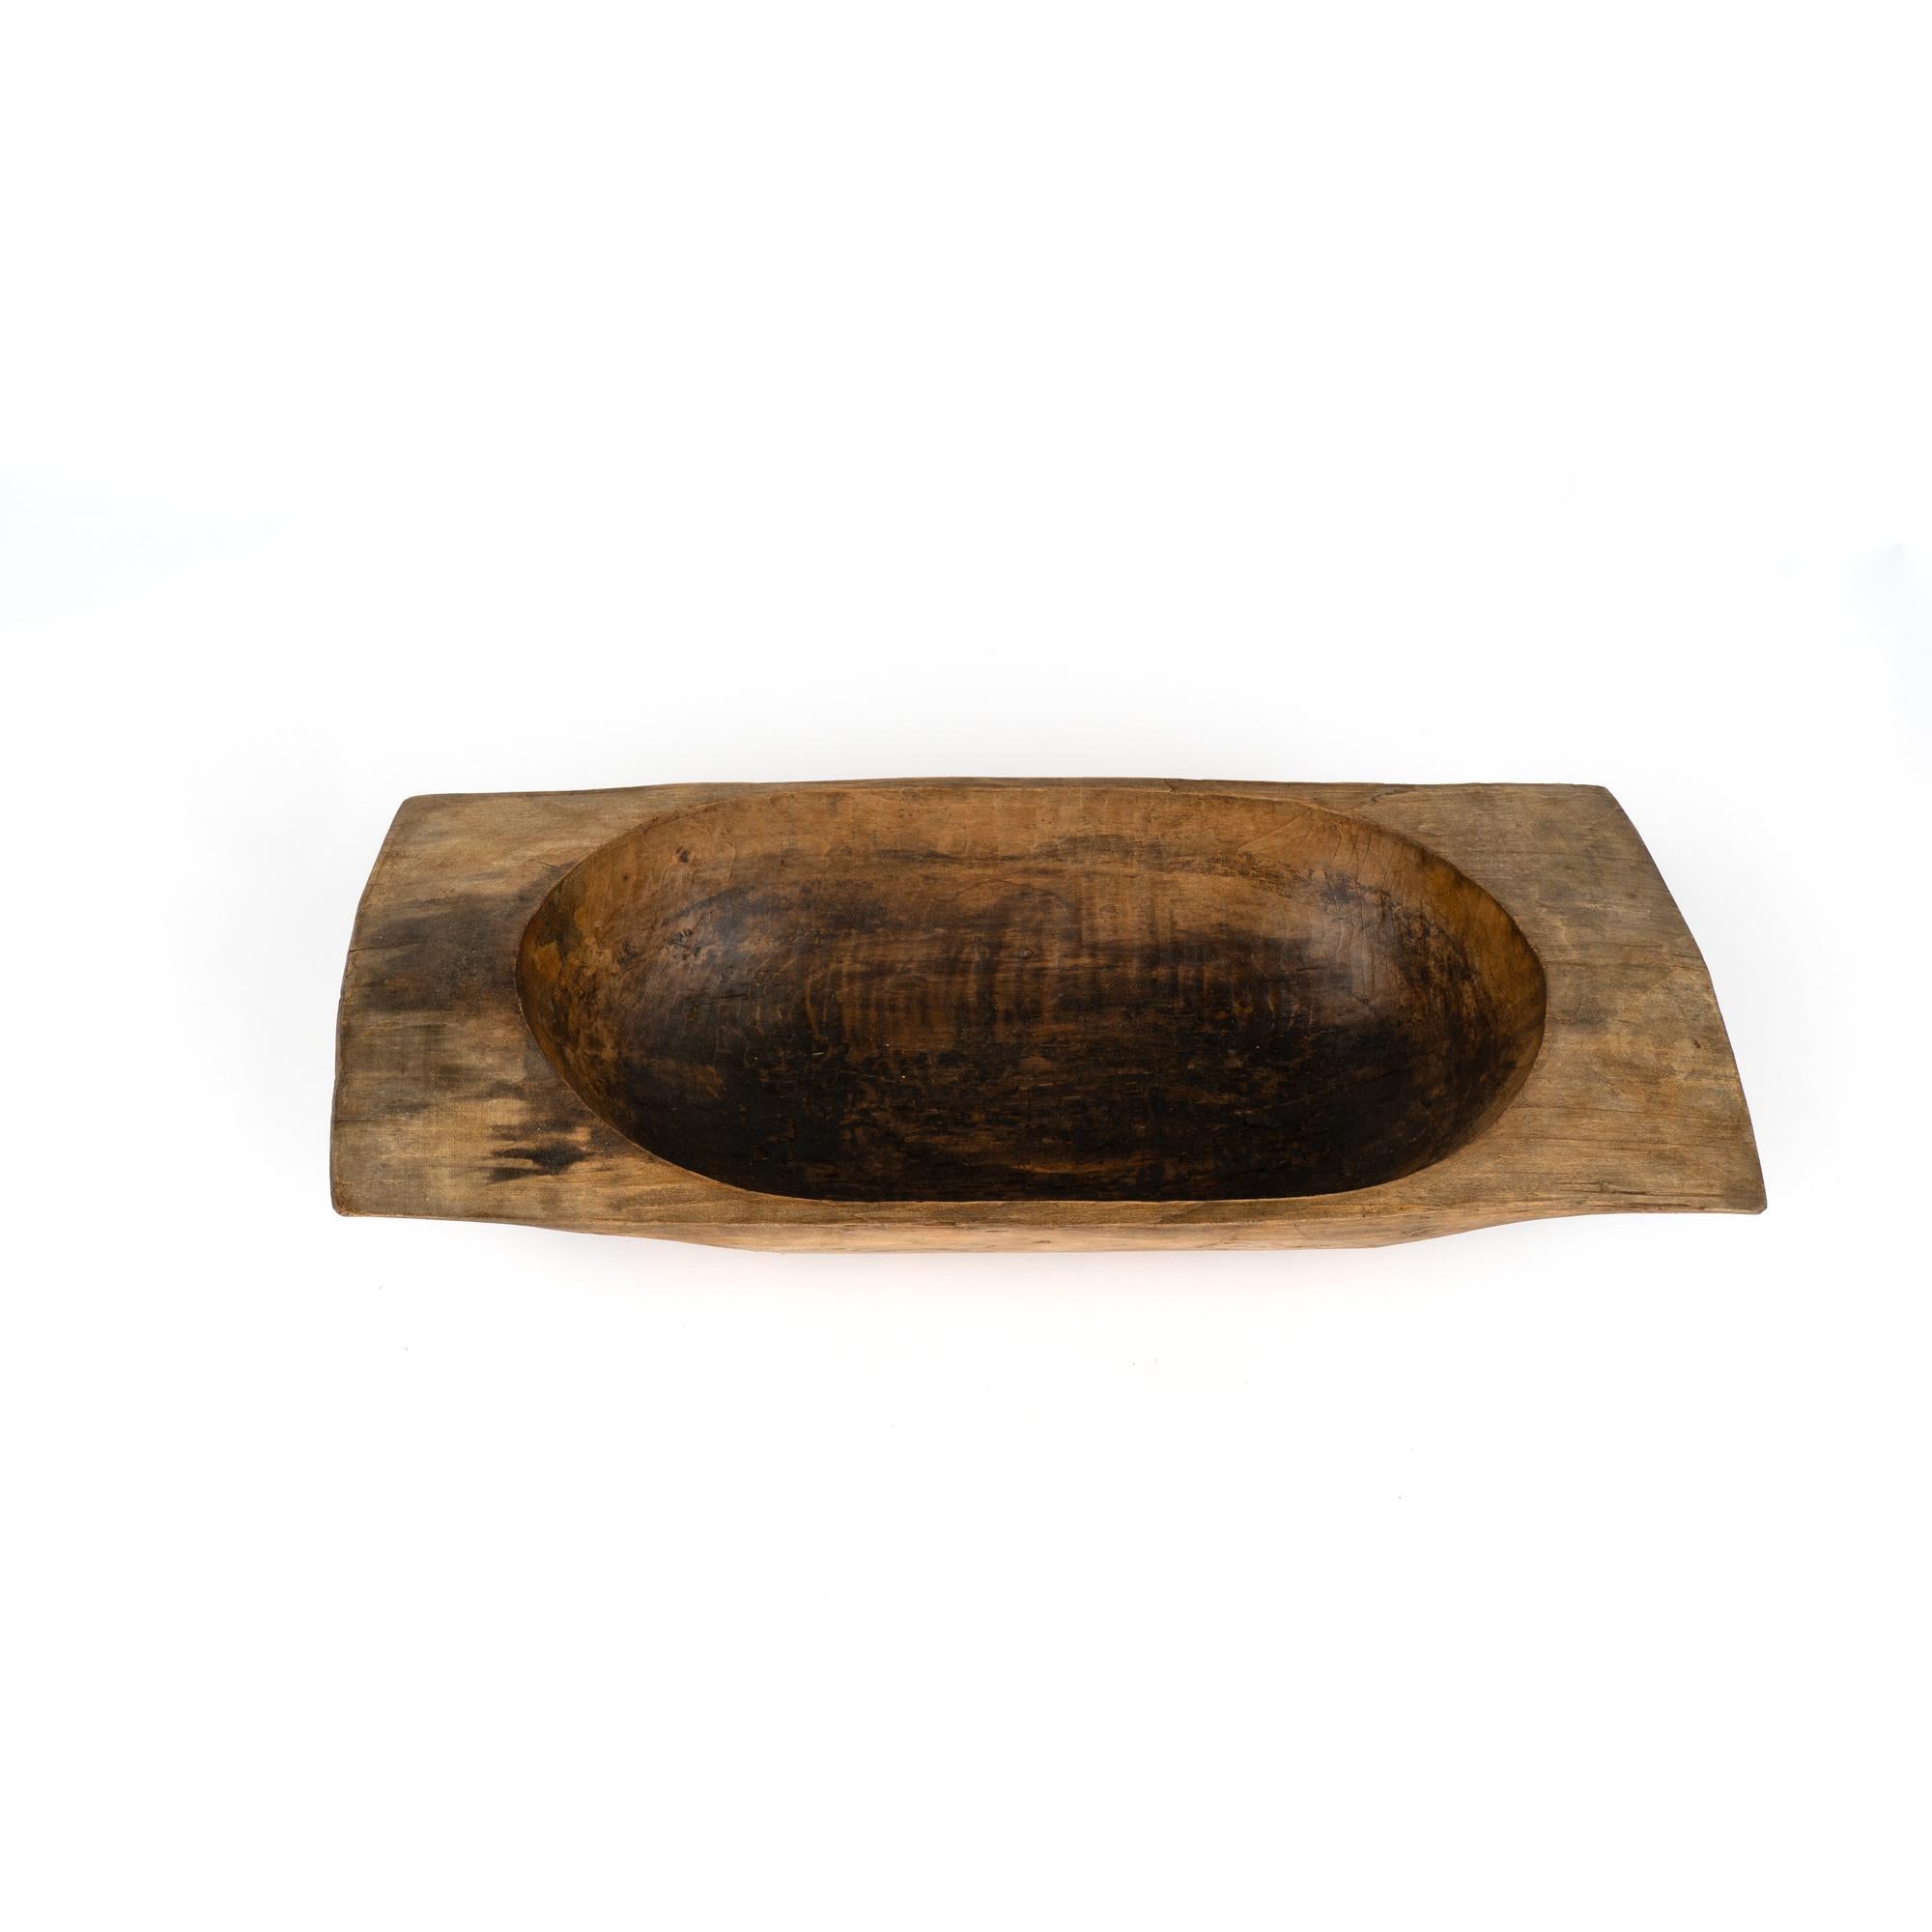 Hungarian Antique Hand Hewn Wooden Dough Bowl, Hungary circa 1890 For Sale